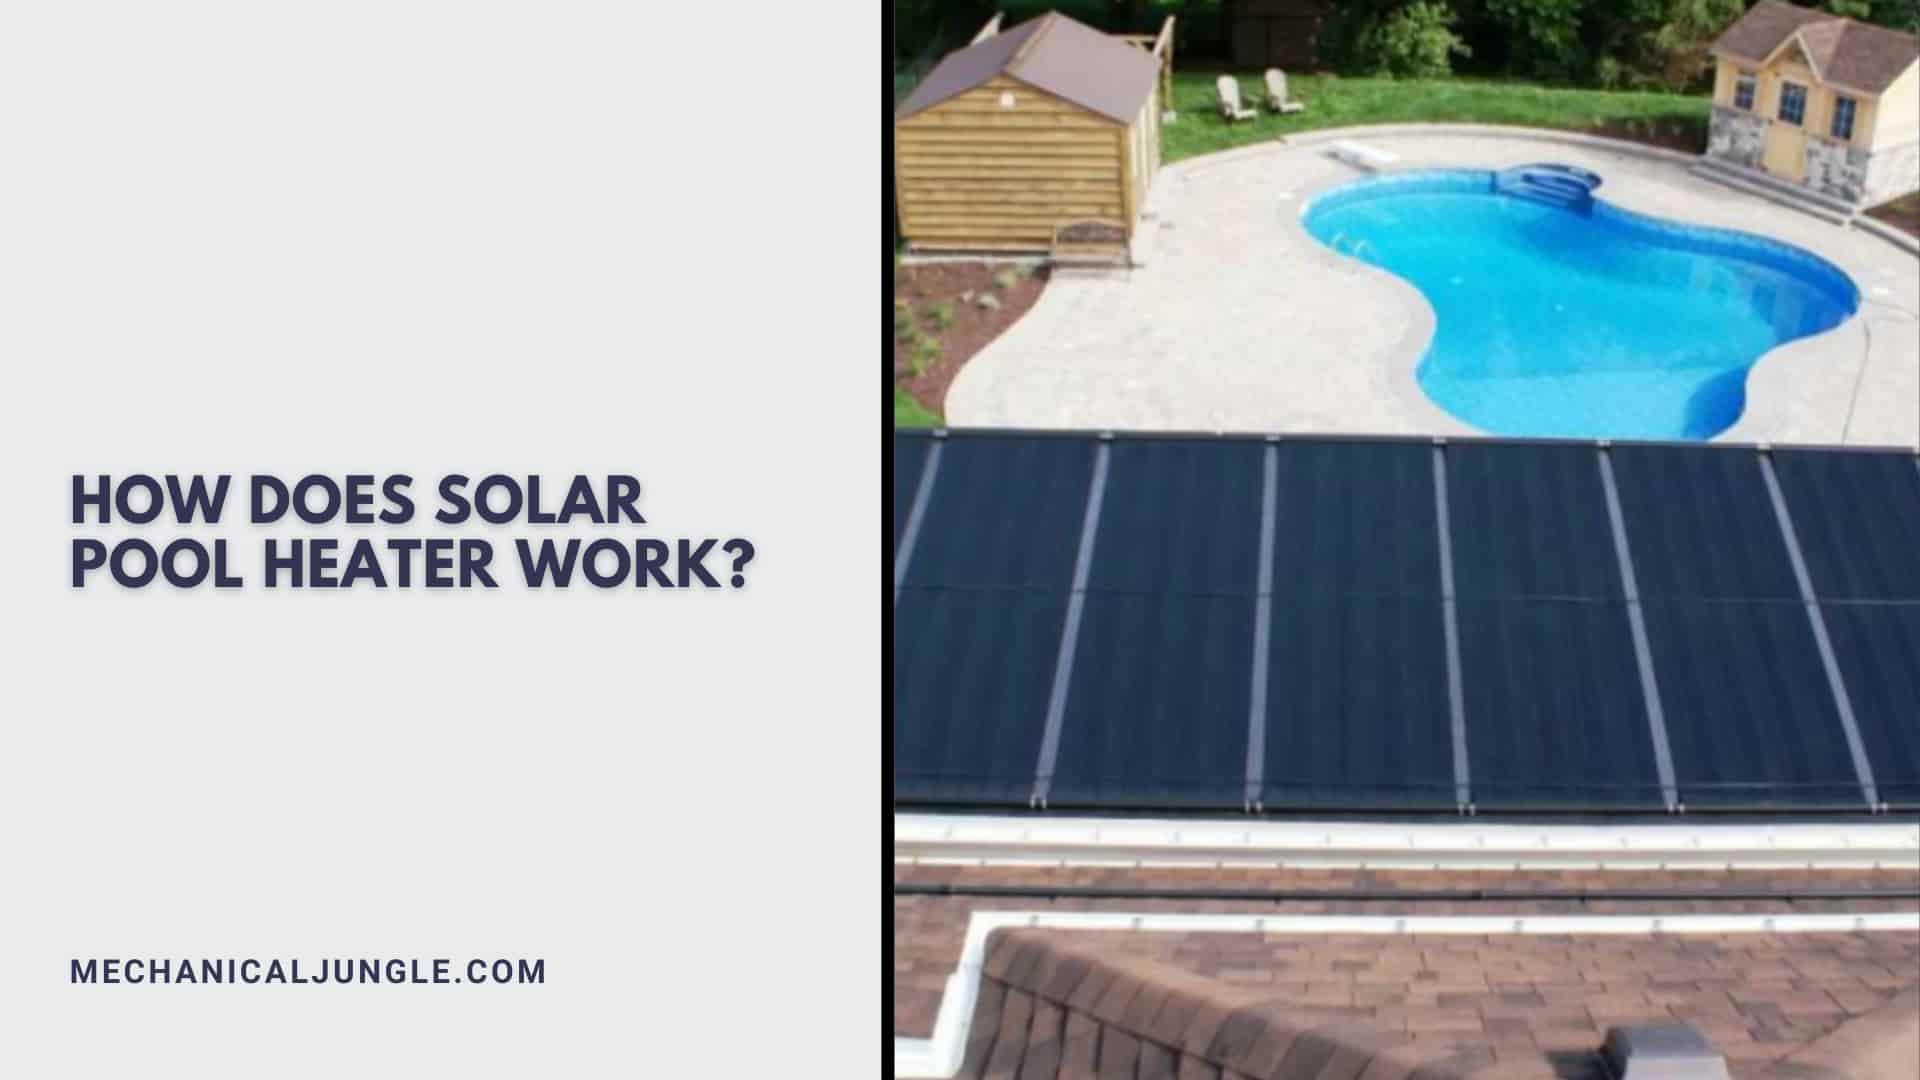 How Does Solar Pool Heater Work?